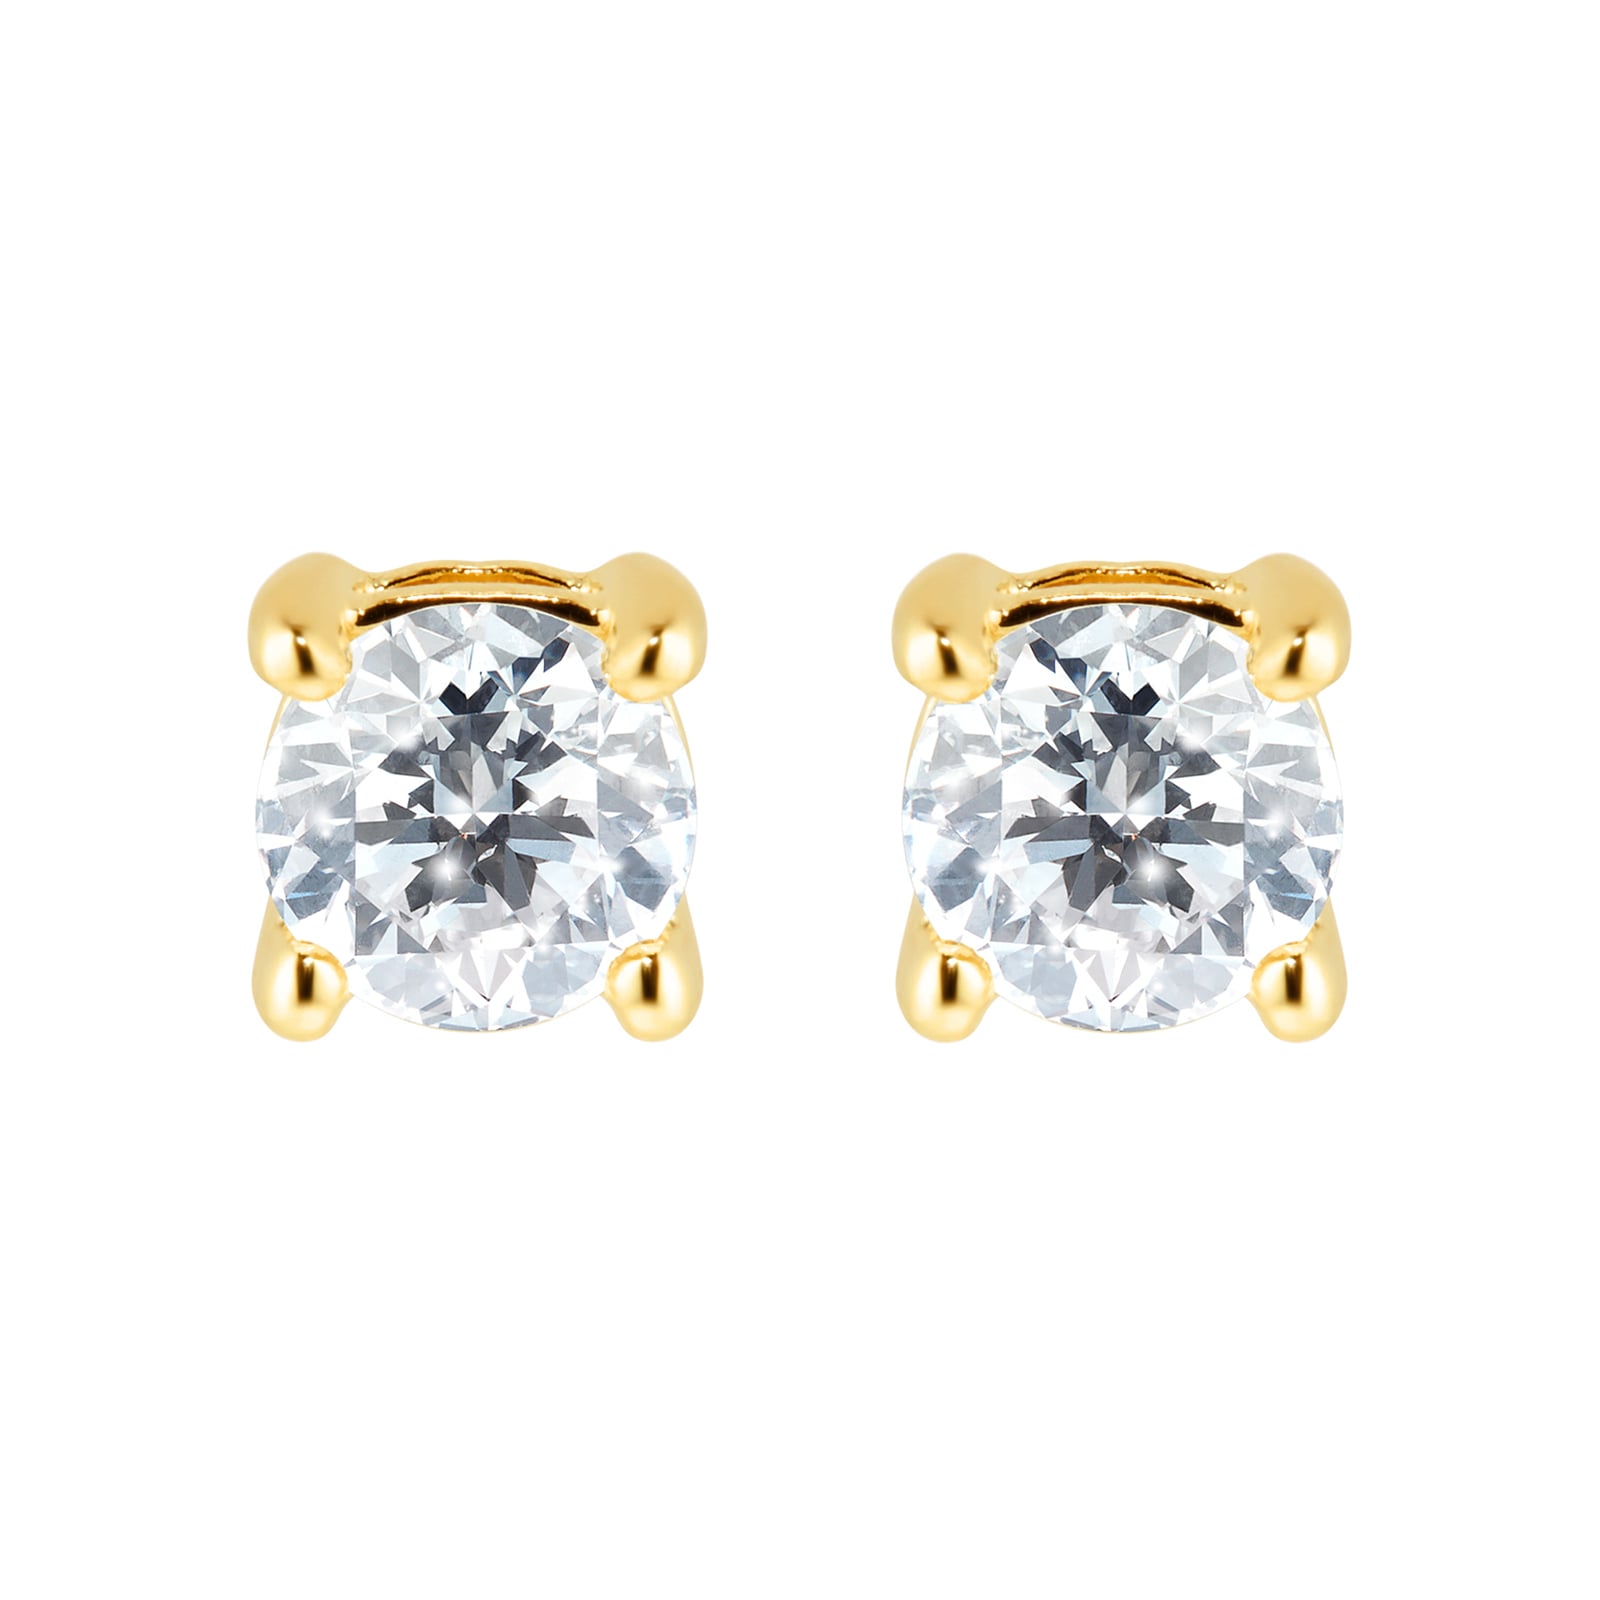 18ct Yellow Gold 0.50ct Goldsmiths Brightest Diamond 4 Claw Stud Earrings